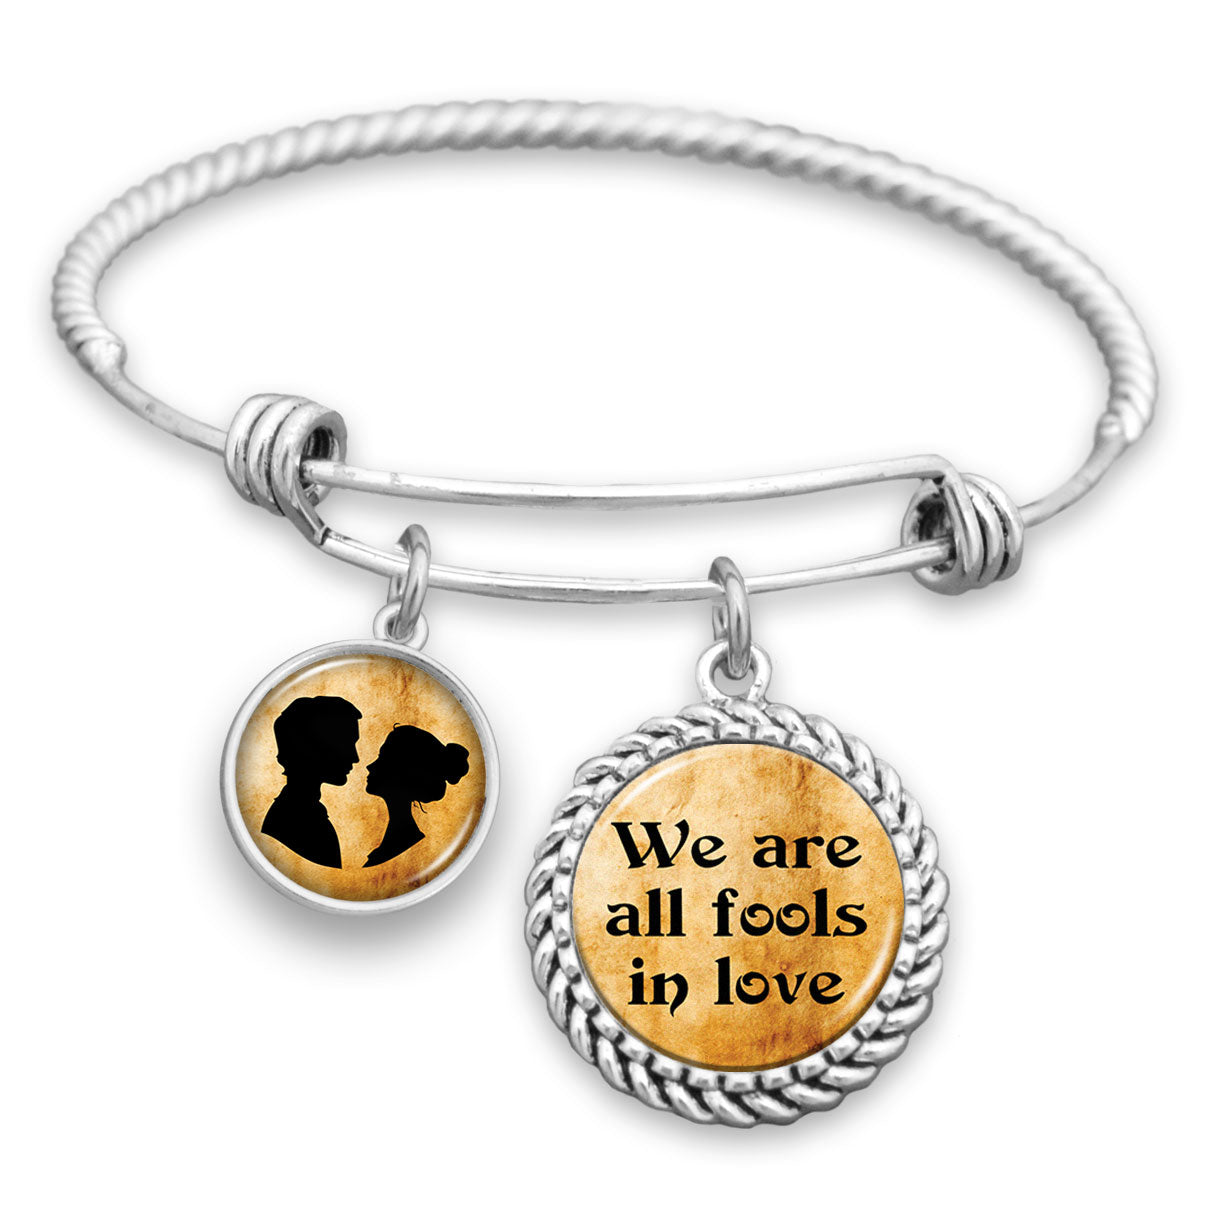 We Are All Fools In Love Charm Bracelet